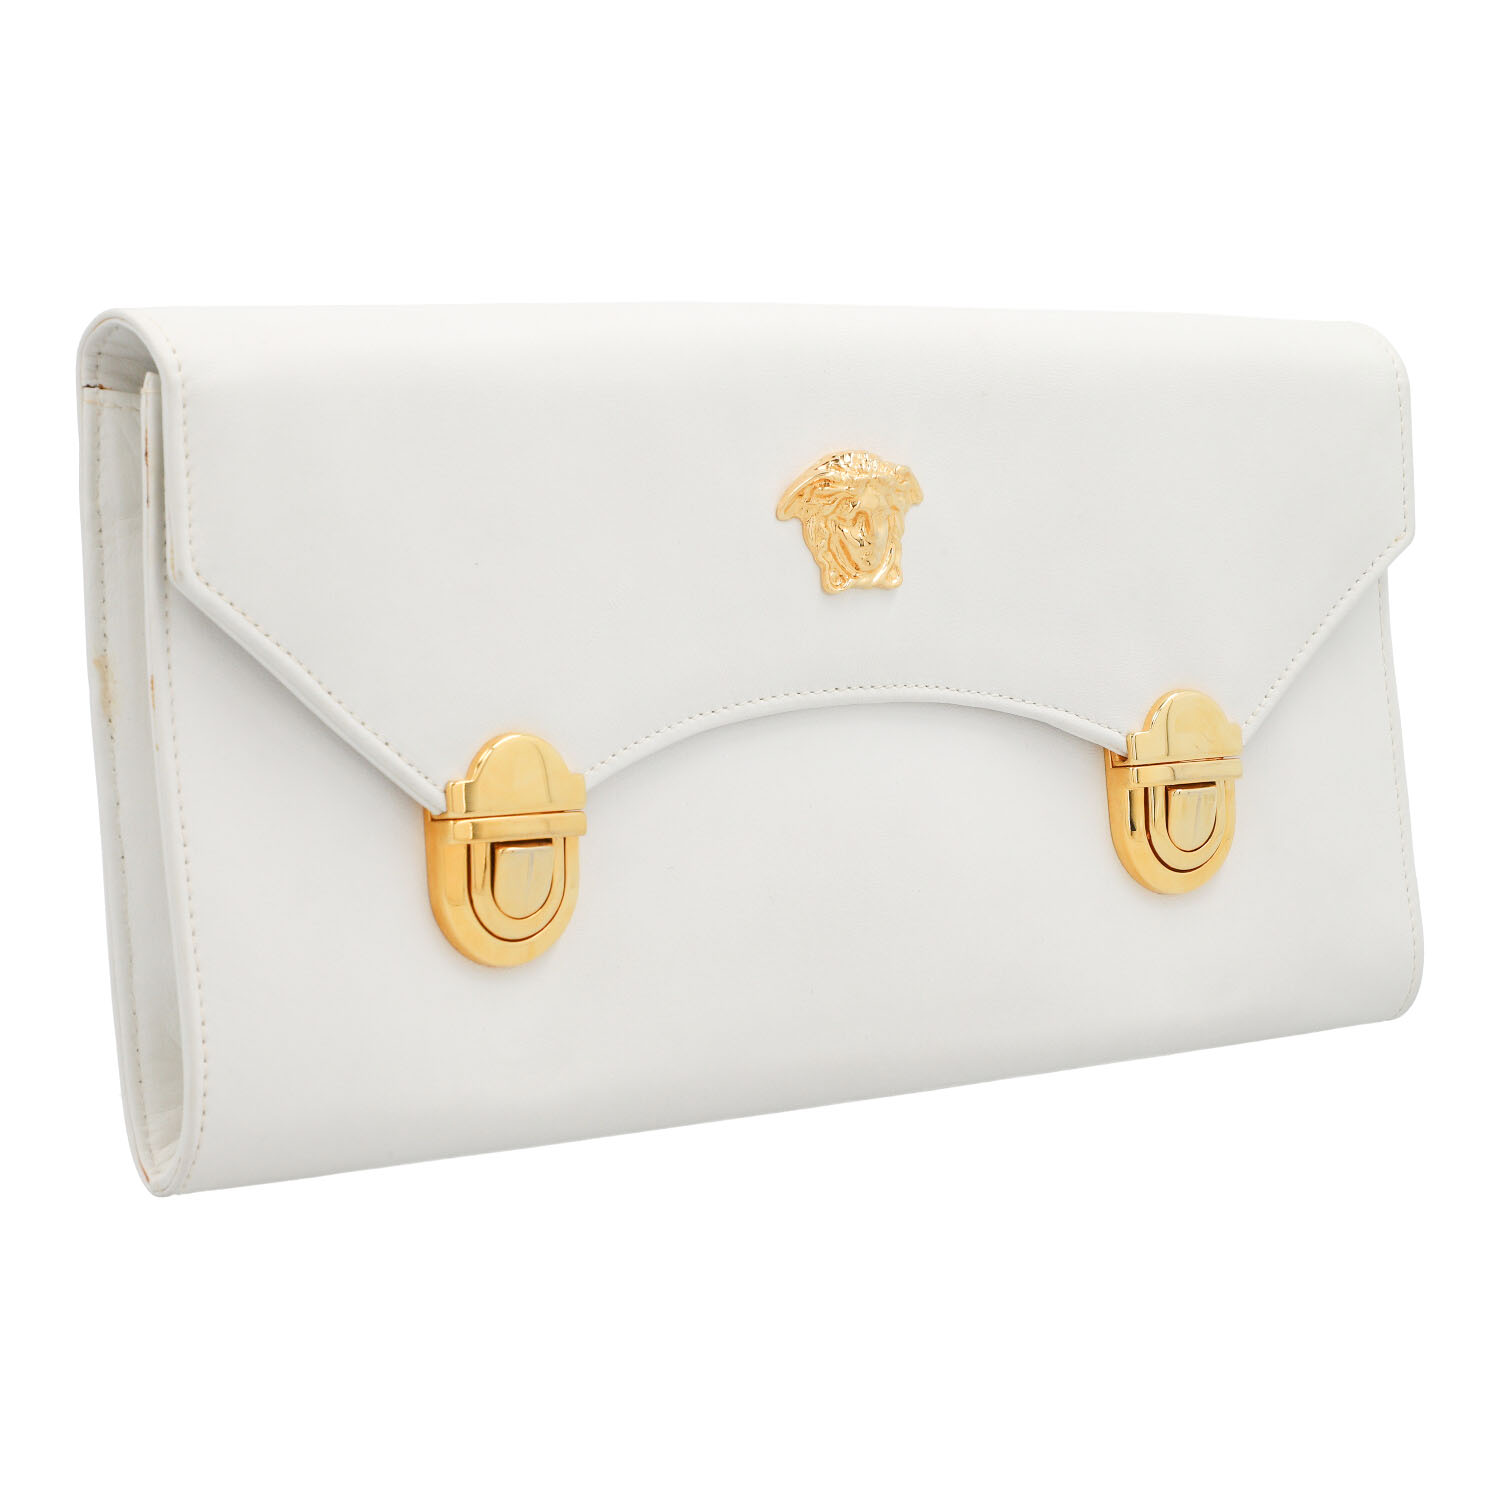 GIANNI VERSACE VINTAGE Clutch. - Image 2 of 6